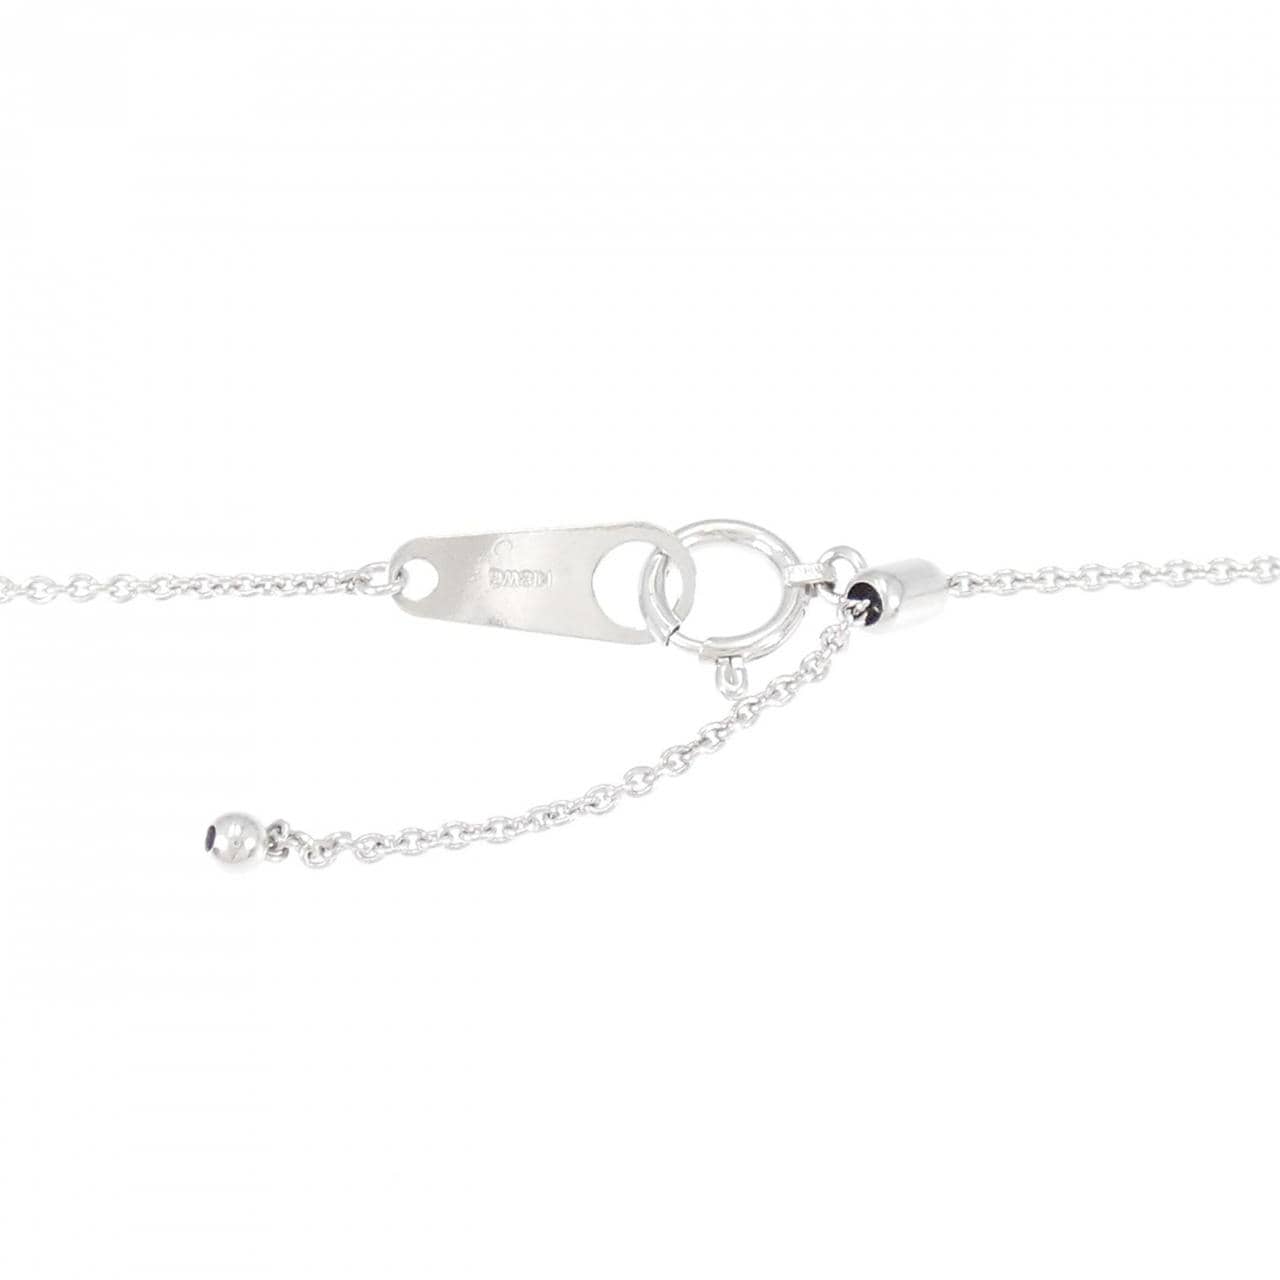 Kashikey Conch Pearl Necklace 0.78CT